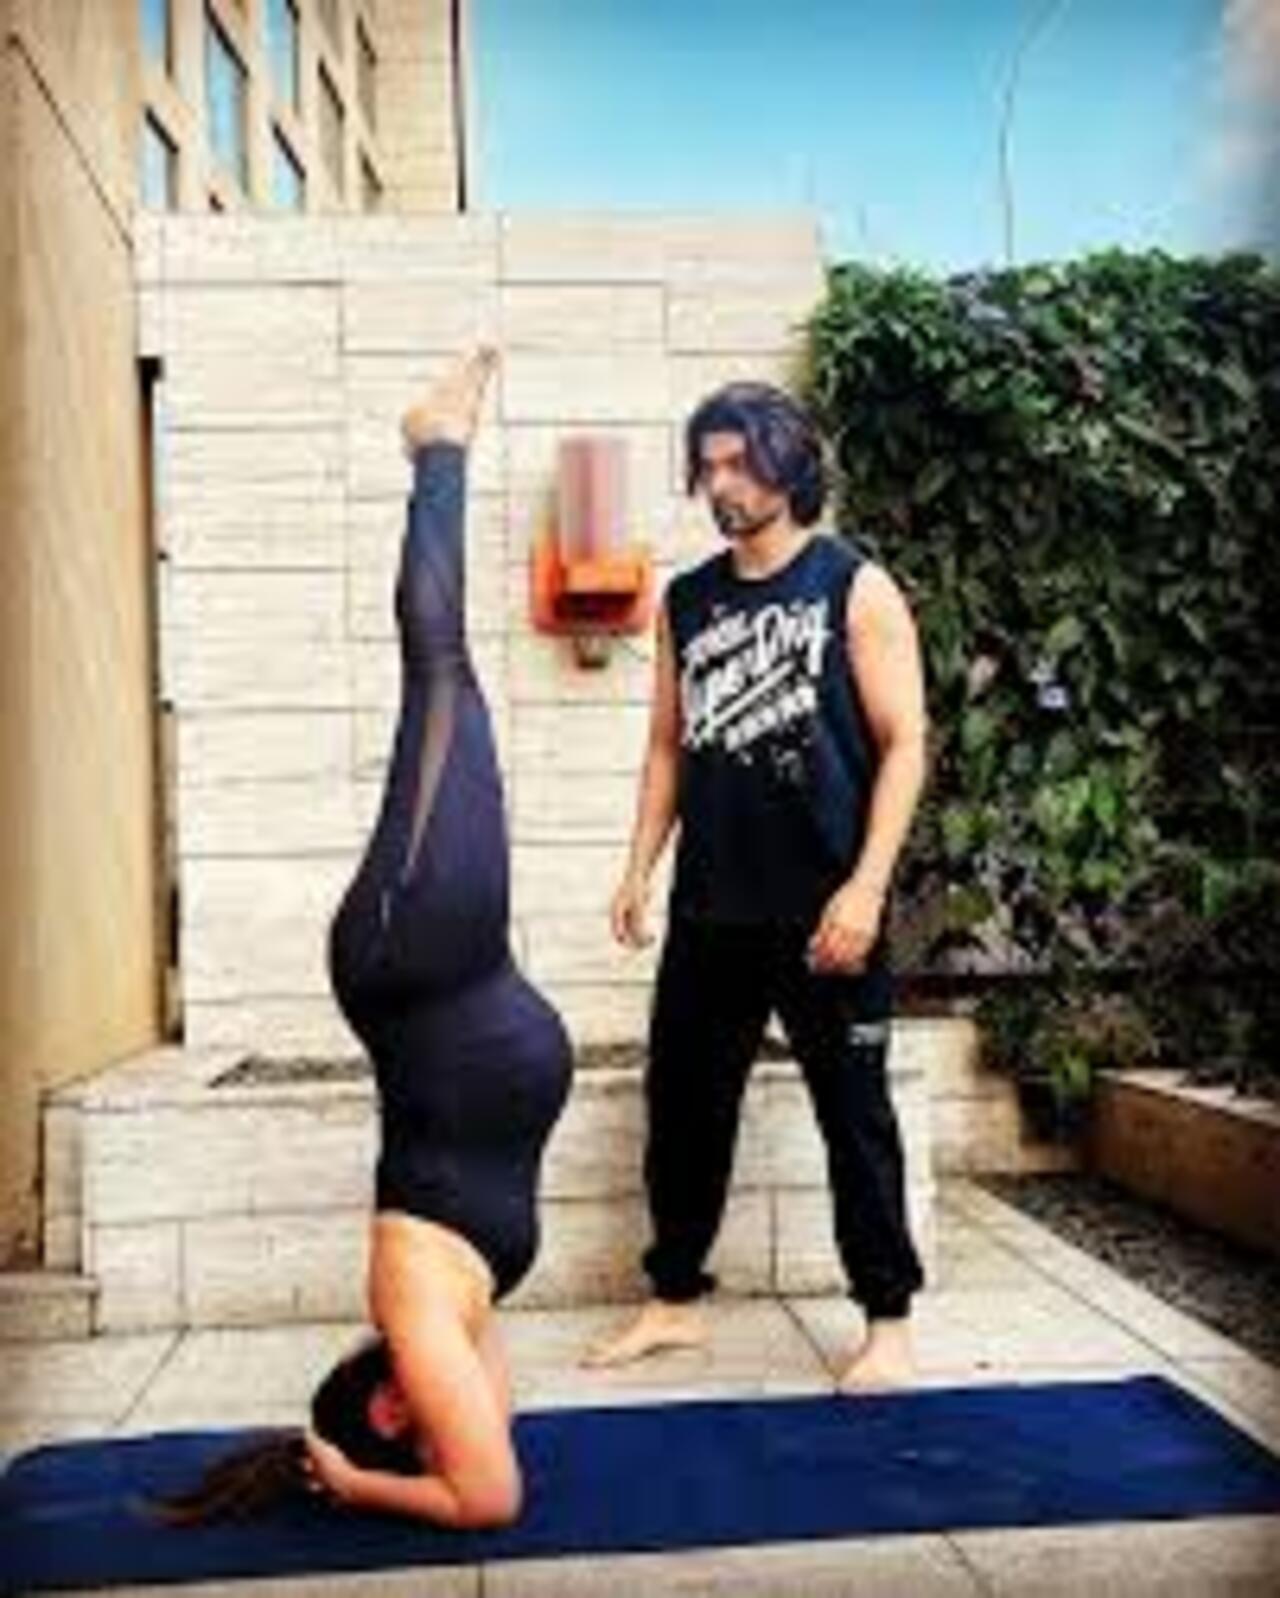 Debina Bonnerjee
The actress delivered both her babies in the same year. The actress practiced yoga during the period for her overall well-being with her husband Gurmeet Choudhary being her support